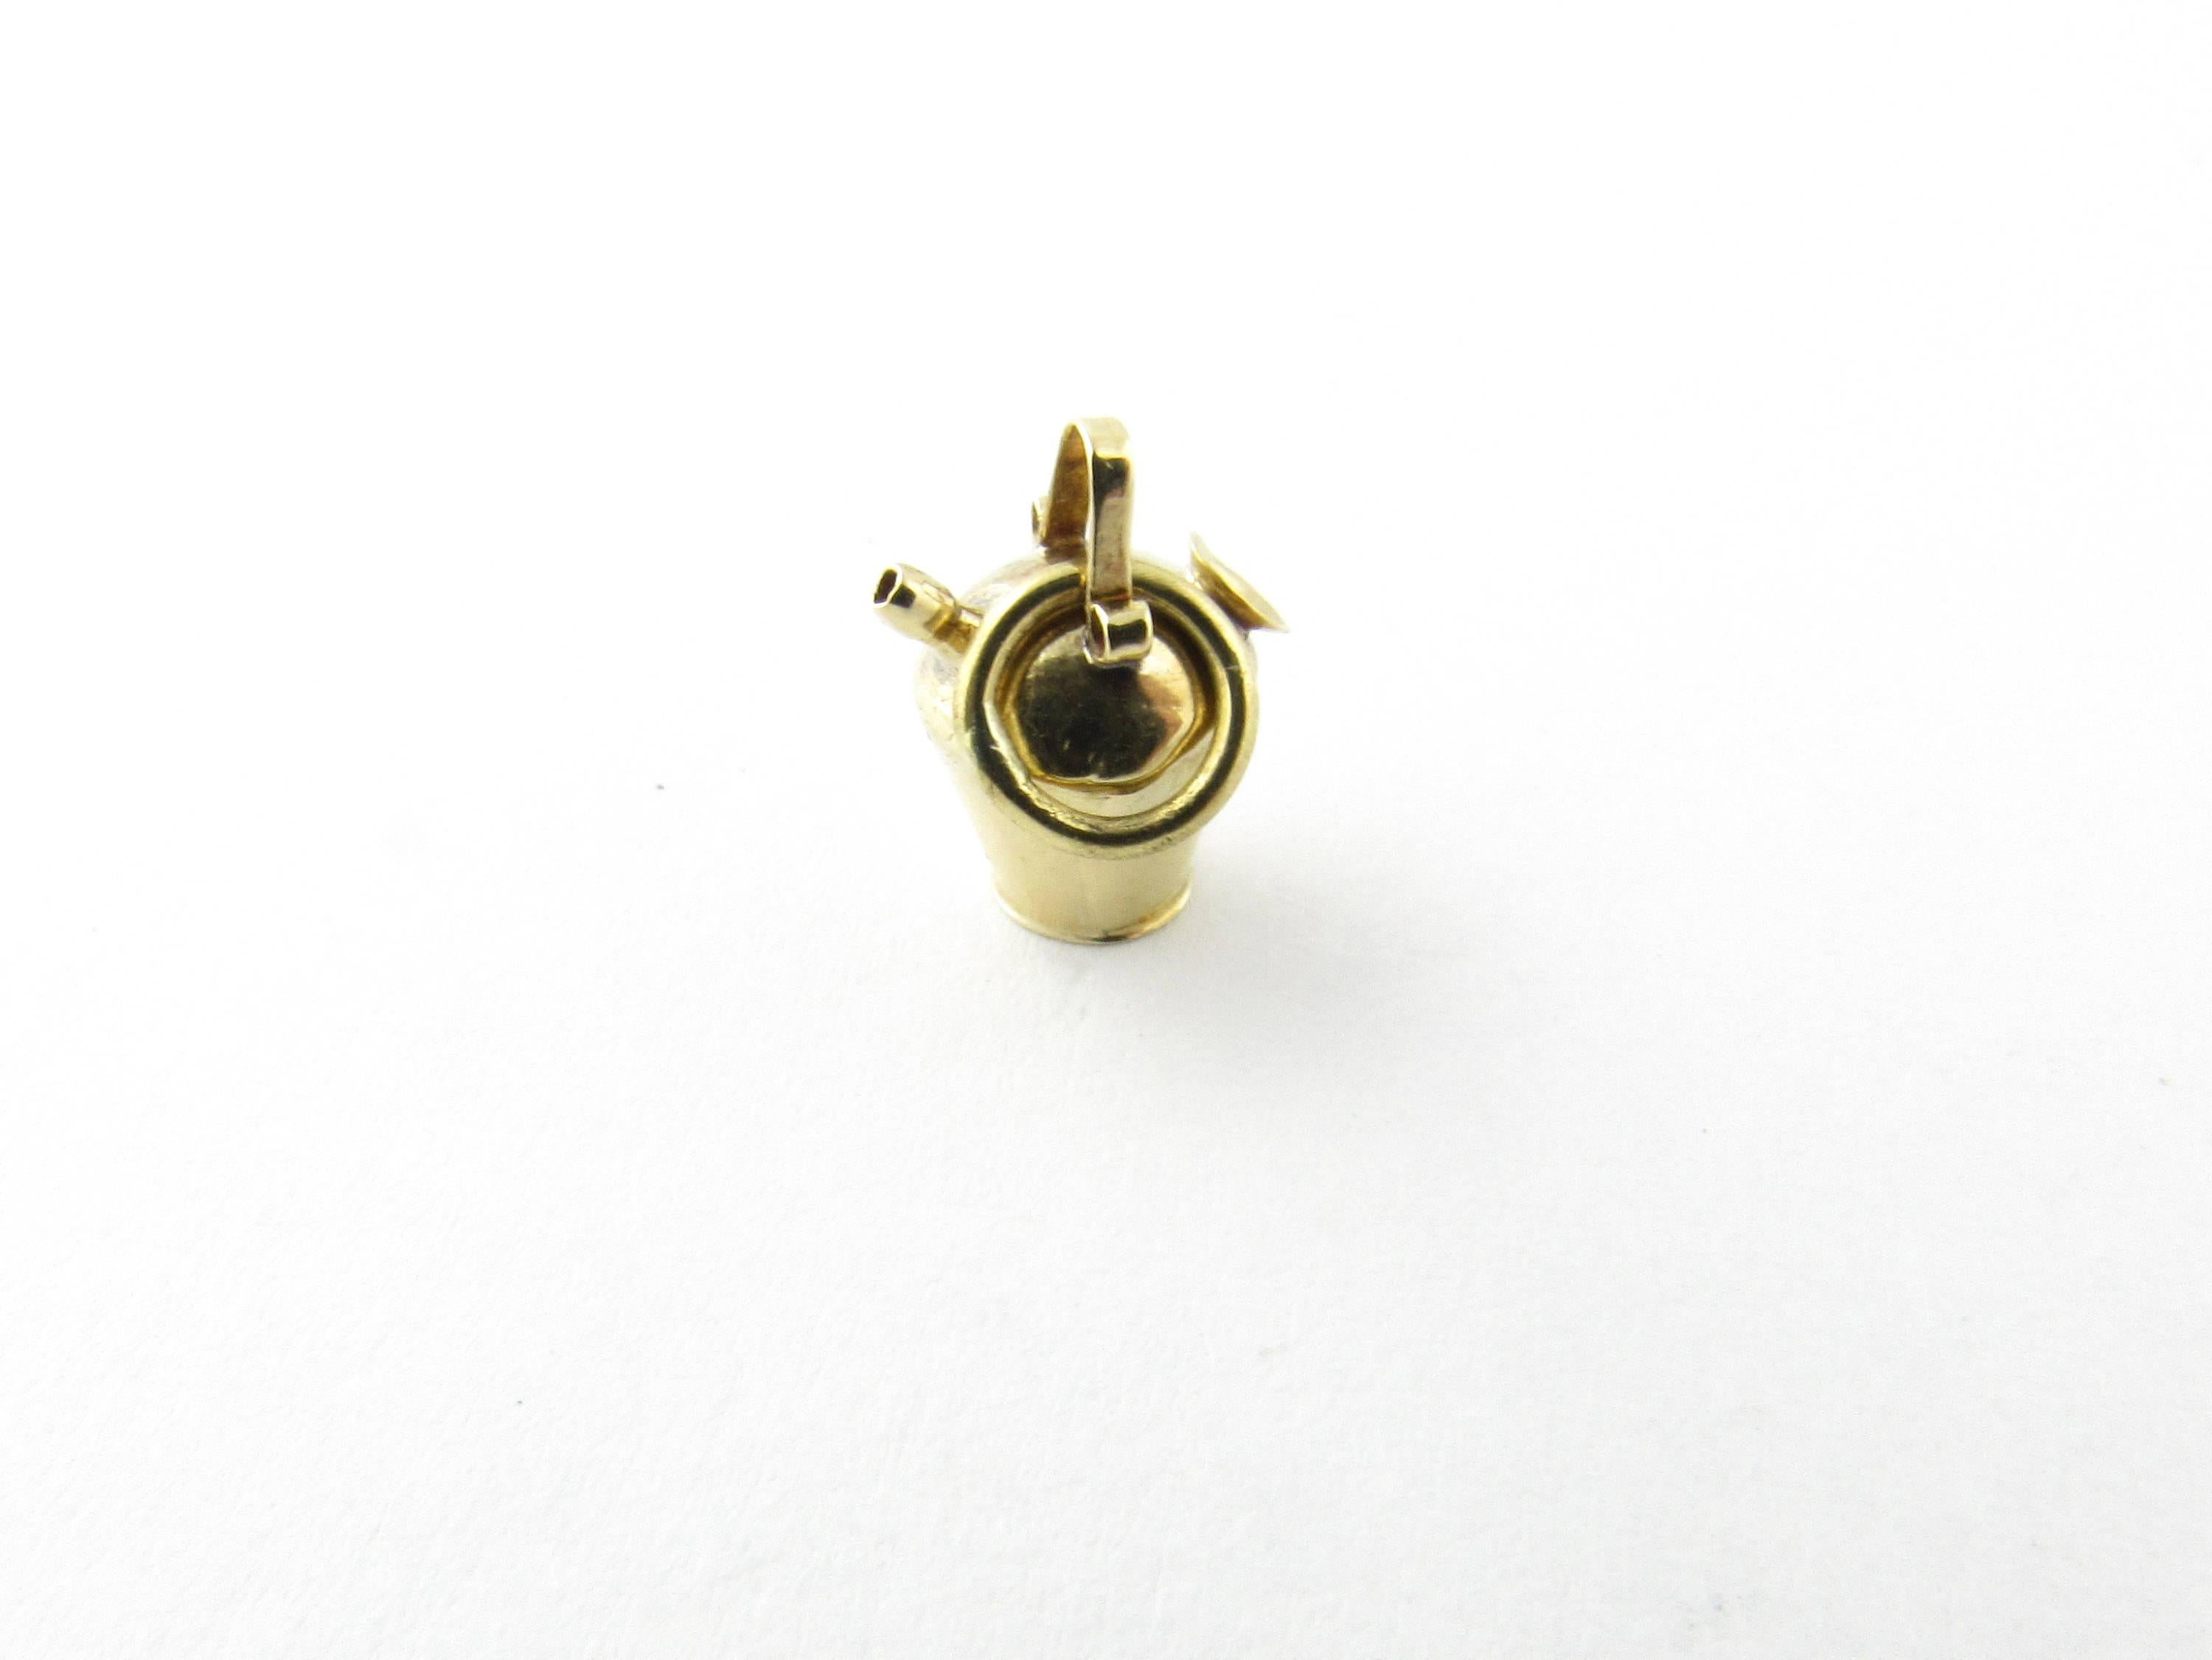 Vintage 18 Karat Yellow Gold Milk Can Charm
This lovely charm depicts a miniature old-fashioned milk can meticulously detailed in 18K yellow gold. 
Size:  12 mm x  8 mm (actual charm) 
Weight:  0.3 dwt. /  0.5 gr. 
Hallmark: Acid tested for 18K